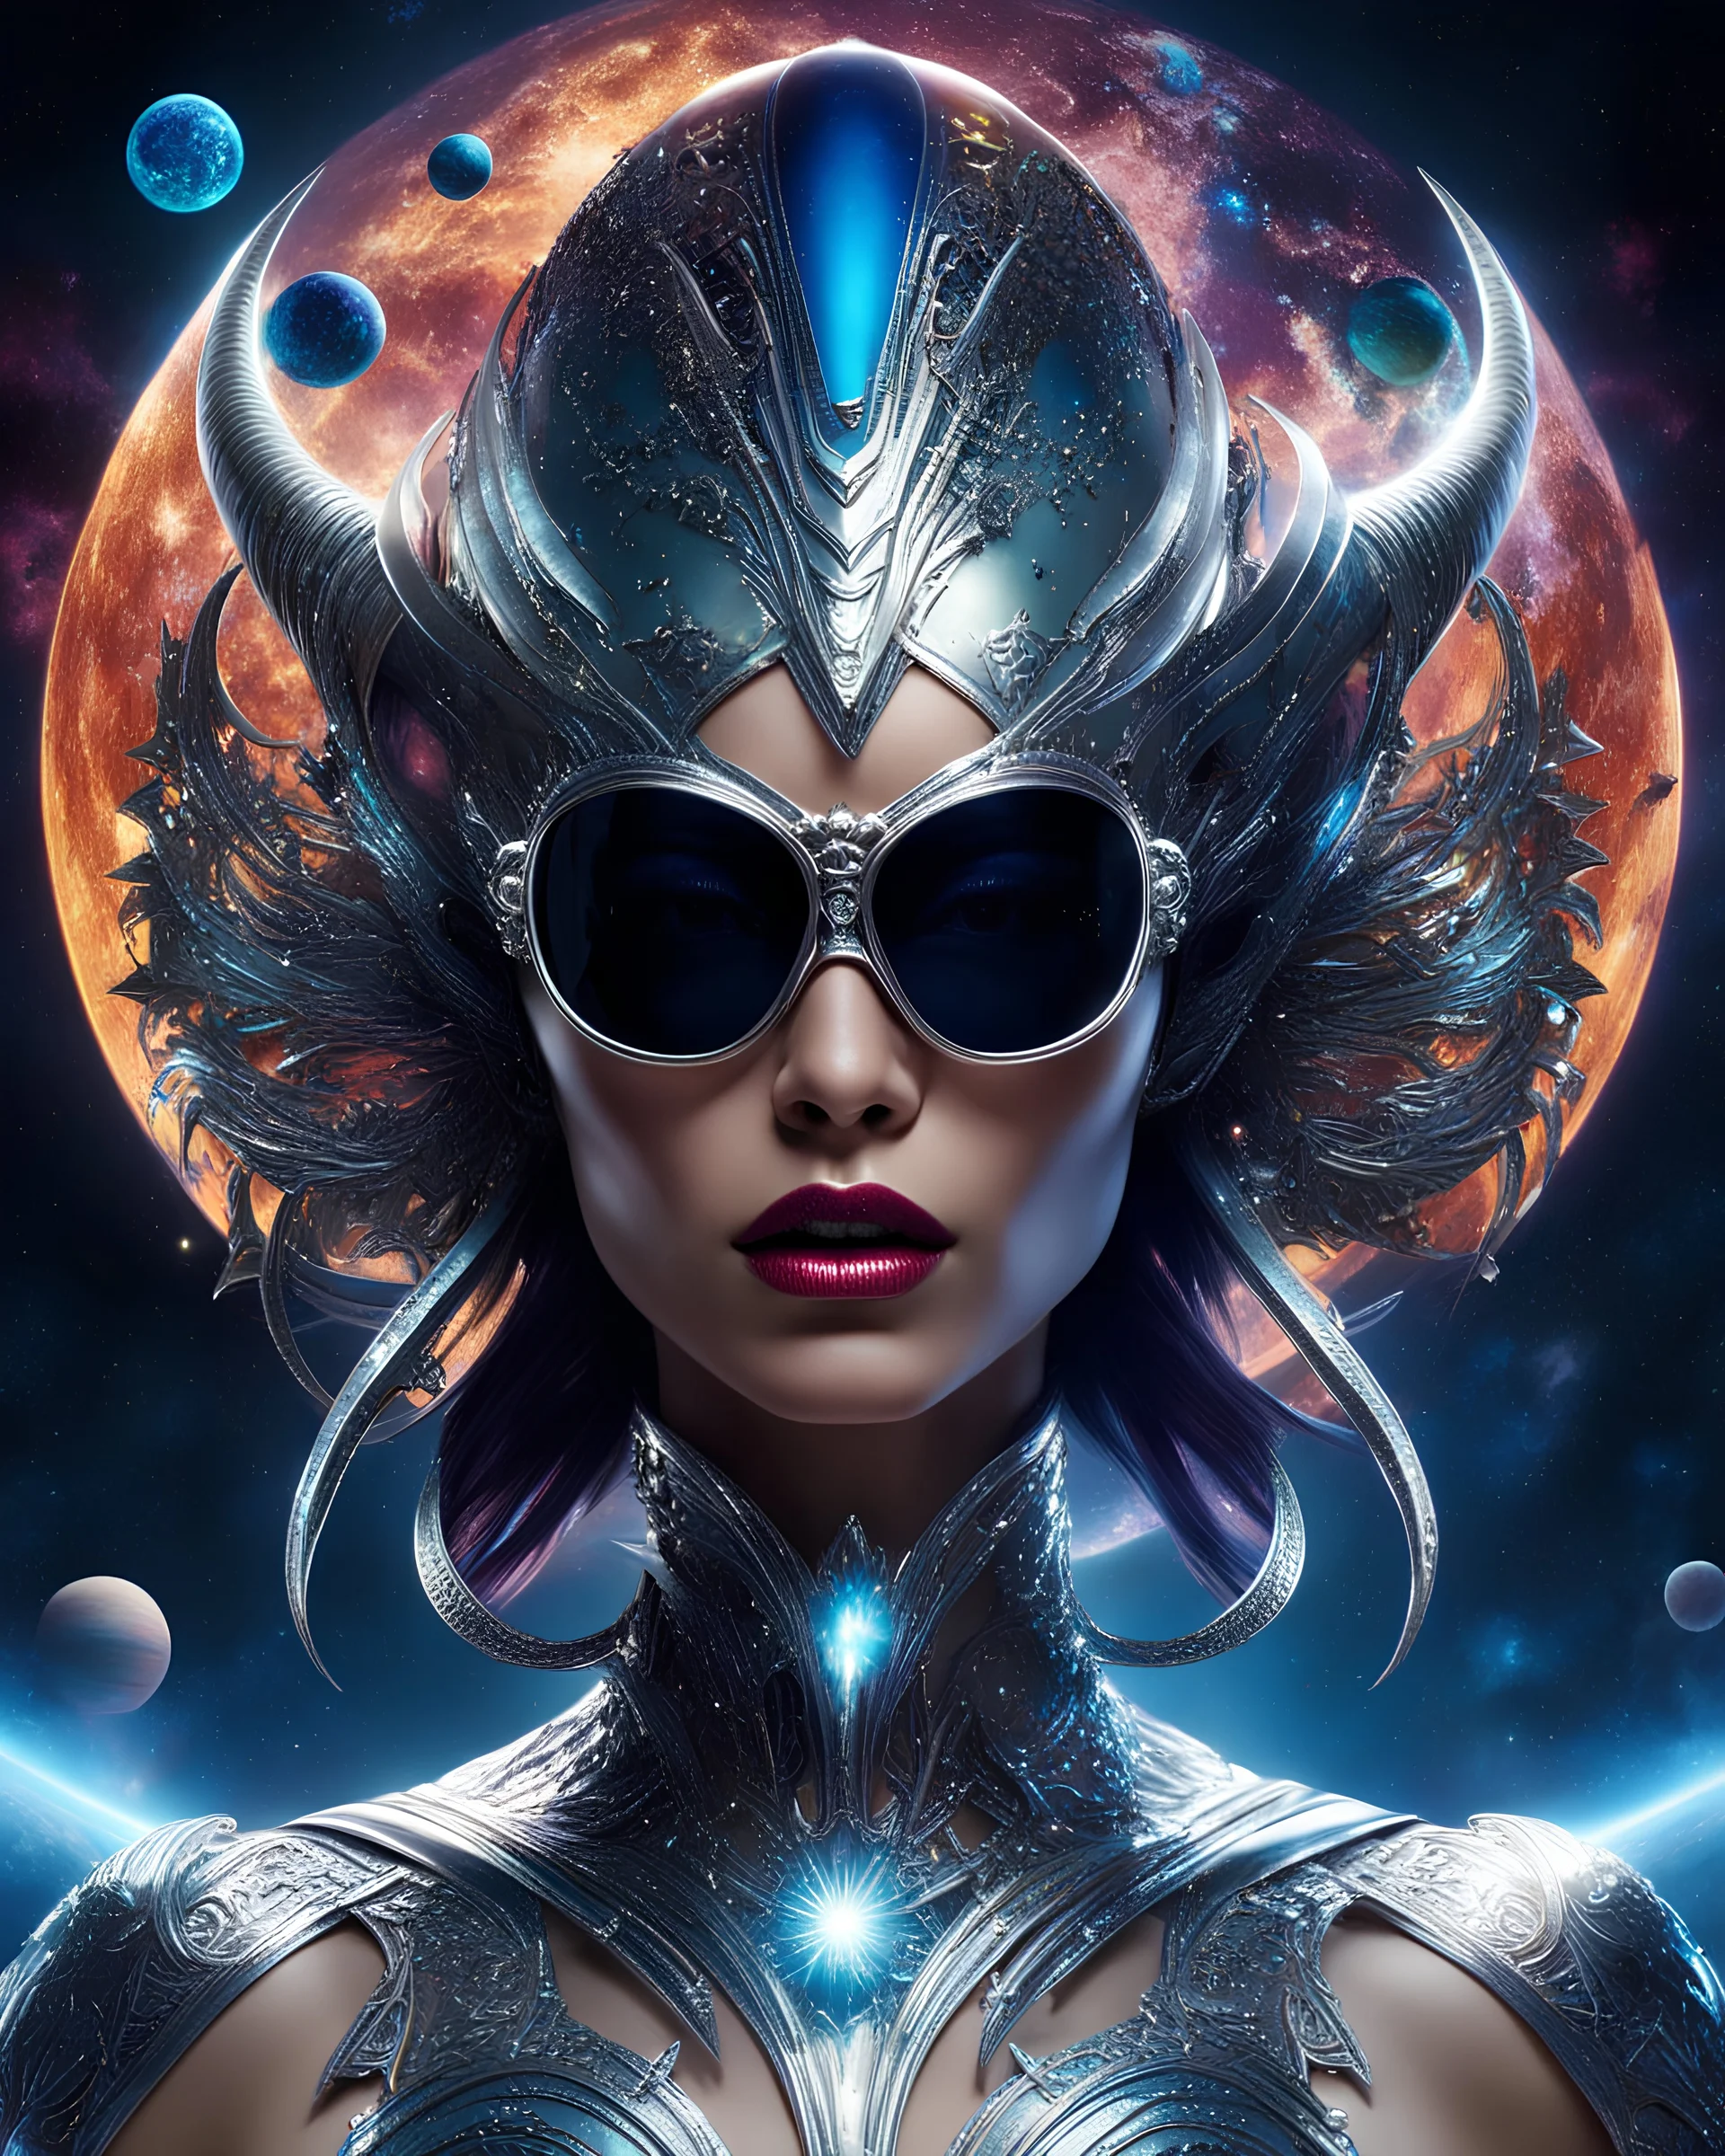 A captivating and vibrant image of an extraterrestrial being, perfectly suited for a futuristic cover. The alien sports a stunning metal headdress, with intricate designs that perfectly match his elegant silver face. Her retro-style oversized sunglasses are adorned with miniature stars and planets, accentuating her otherworldly charm. Against a dark cosmic void, the background displays a fascinating dance of vivid colors, evoking a sense of movement and cosmic energy. Full body